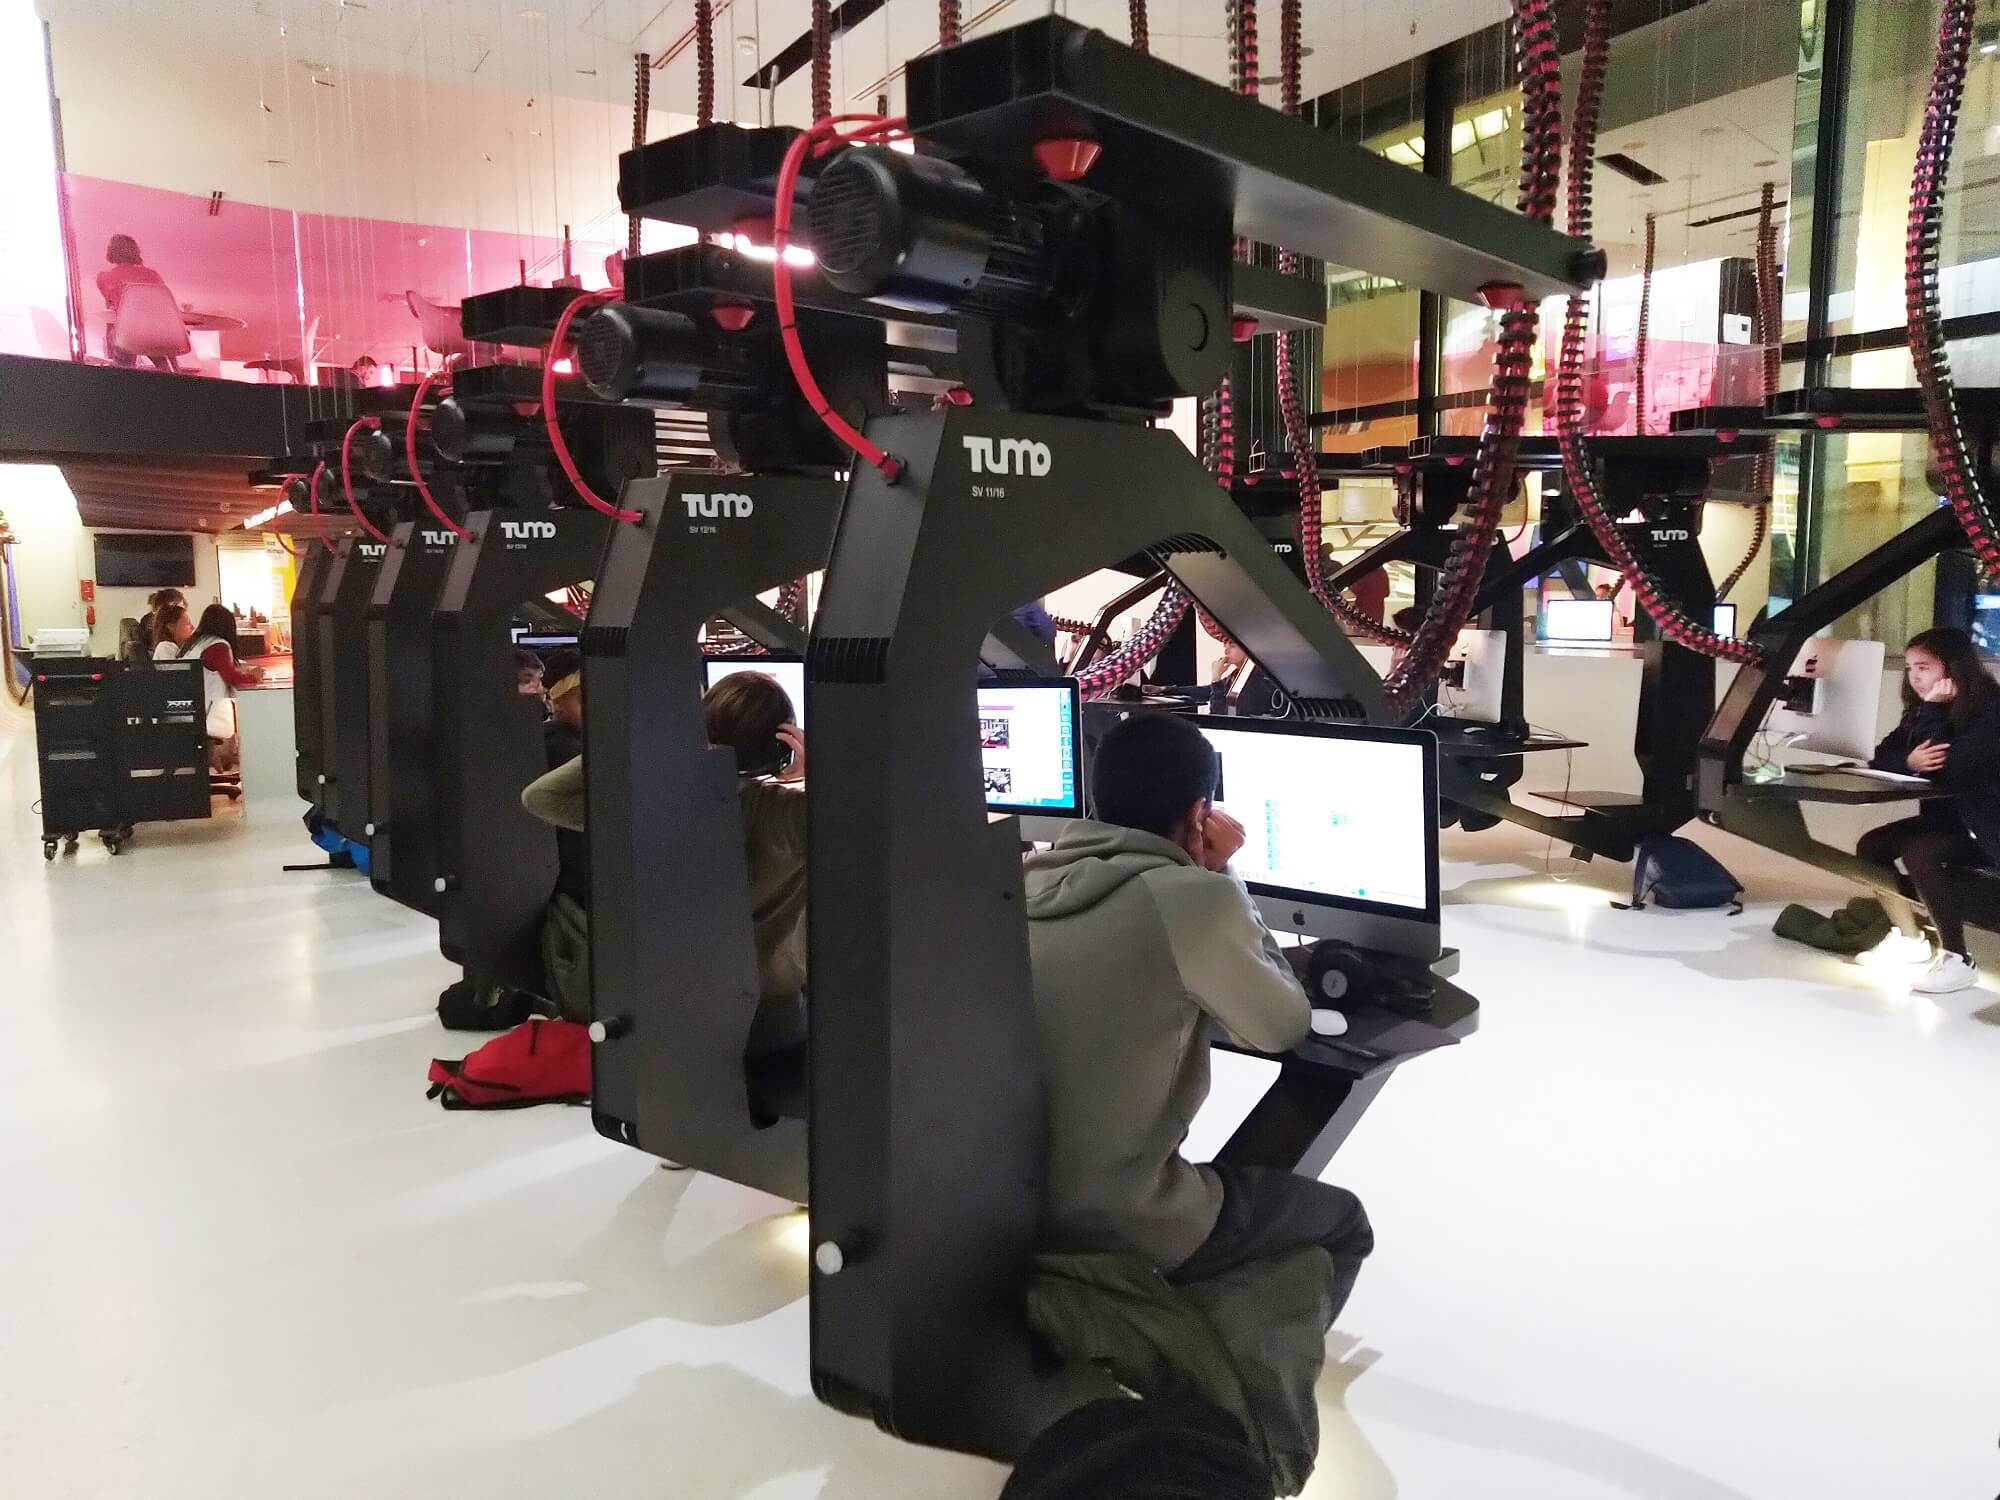 rows and rows of students jacked into freestanding VR setups